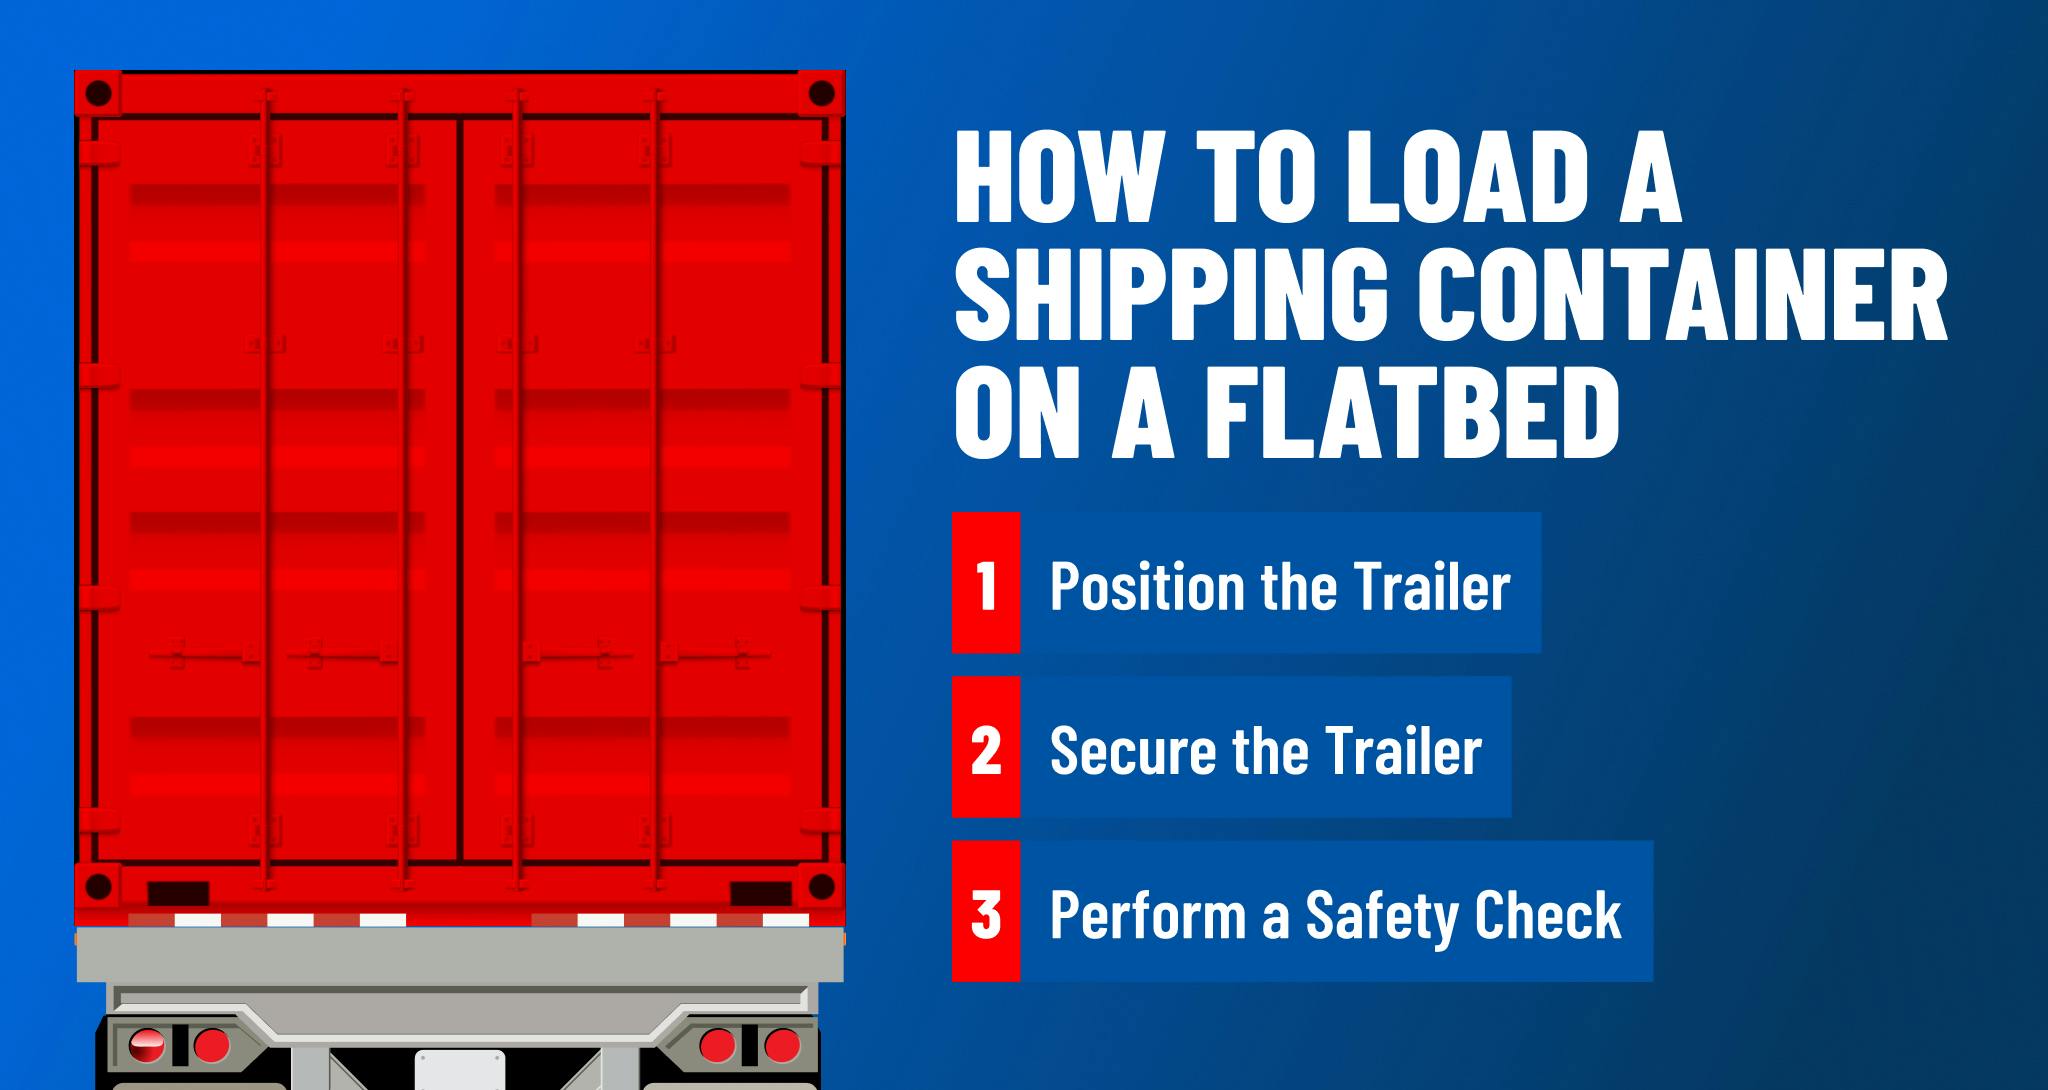 How to Load a Shipping Container.